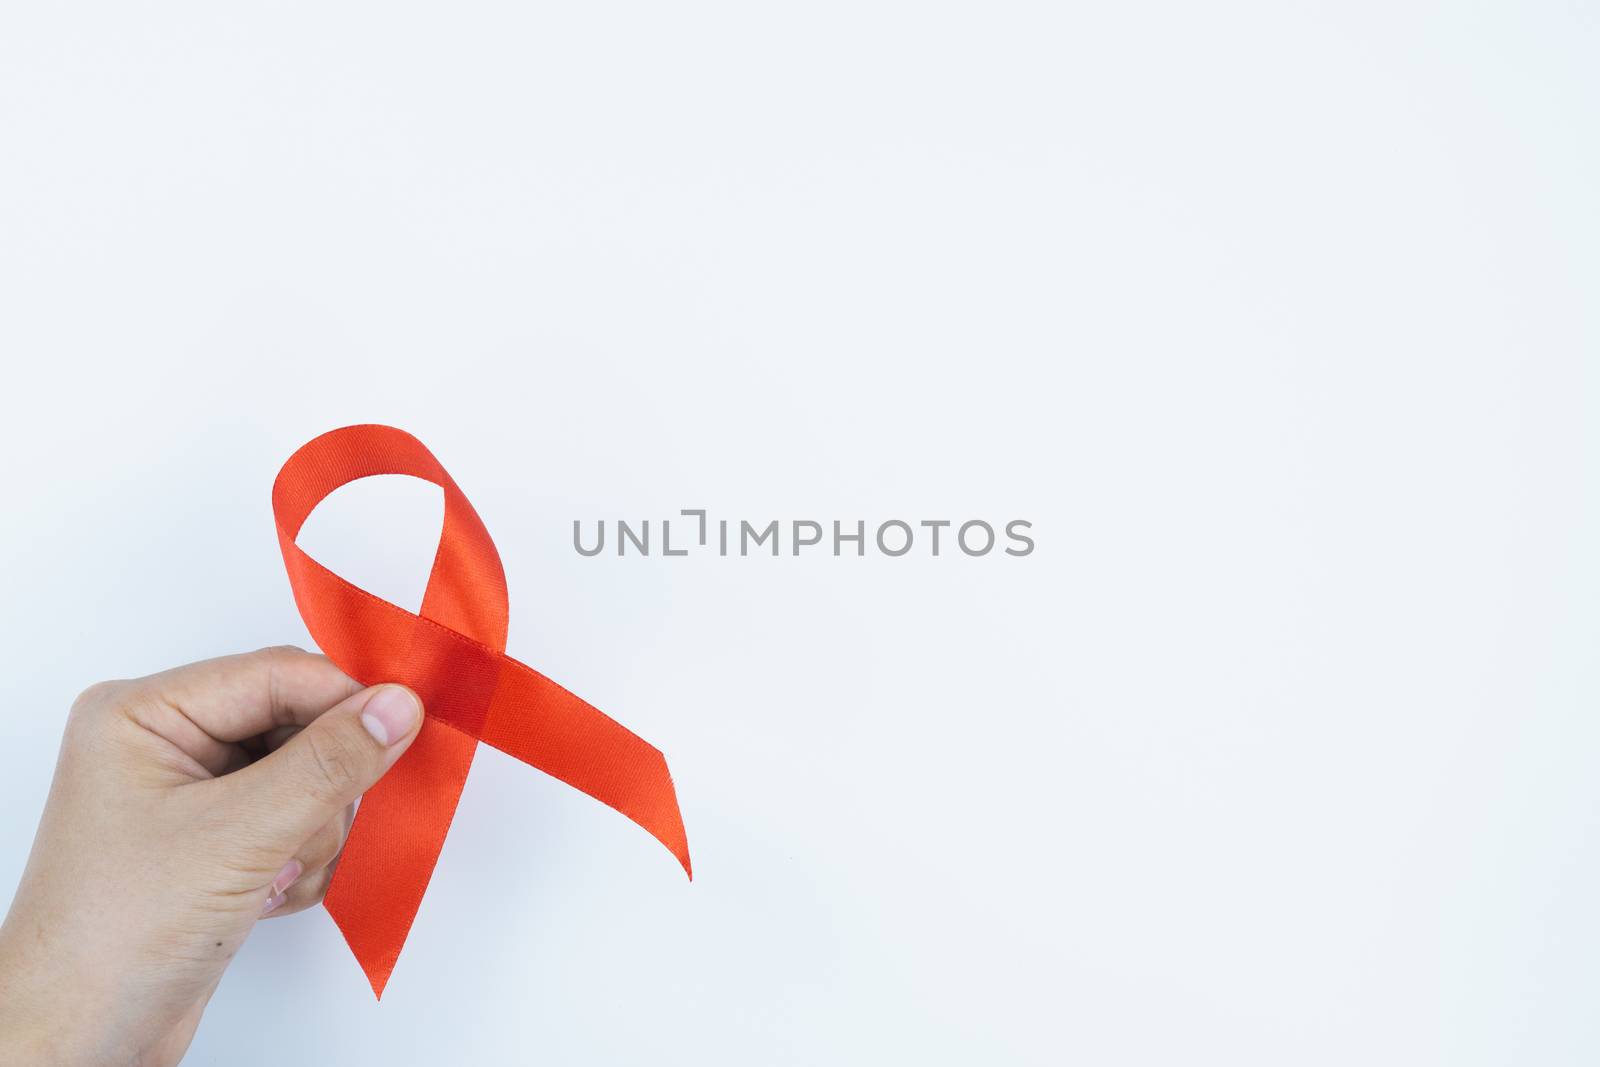 Aids awareness, male hands holding red AIDS awareness ribbon on white background. World Aids Day, Healthcare and medical concept.